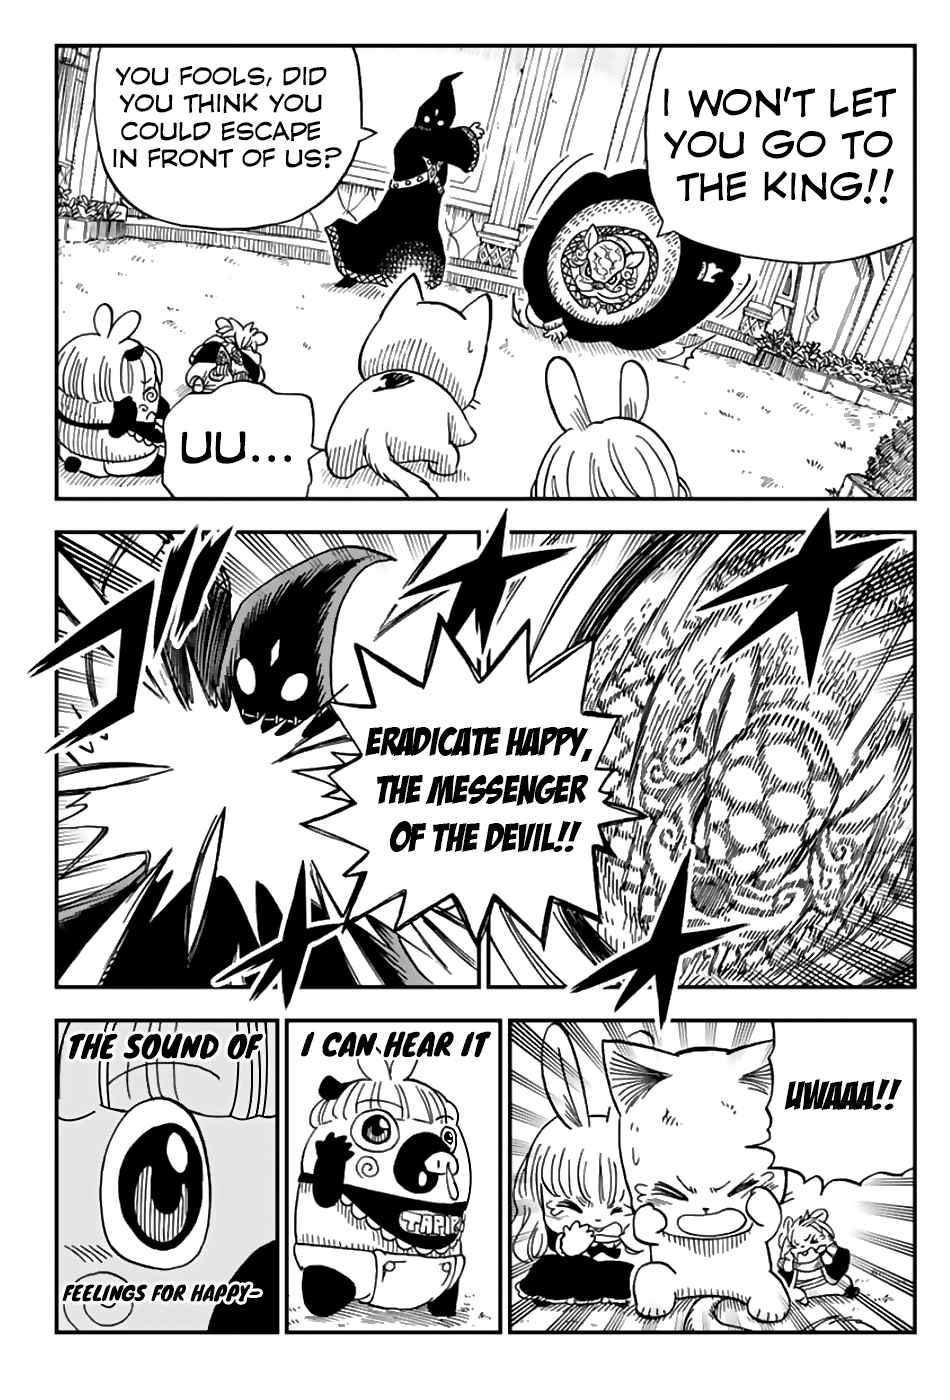 Fairy Tail: Happy's Great Adventure Ch. 46 Healthy Crystal Friends